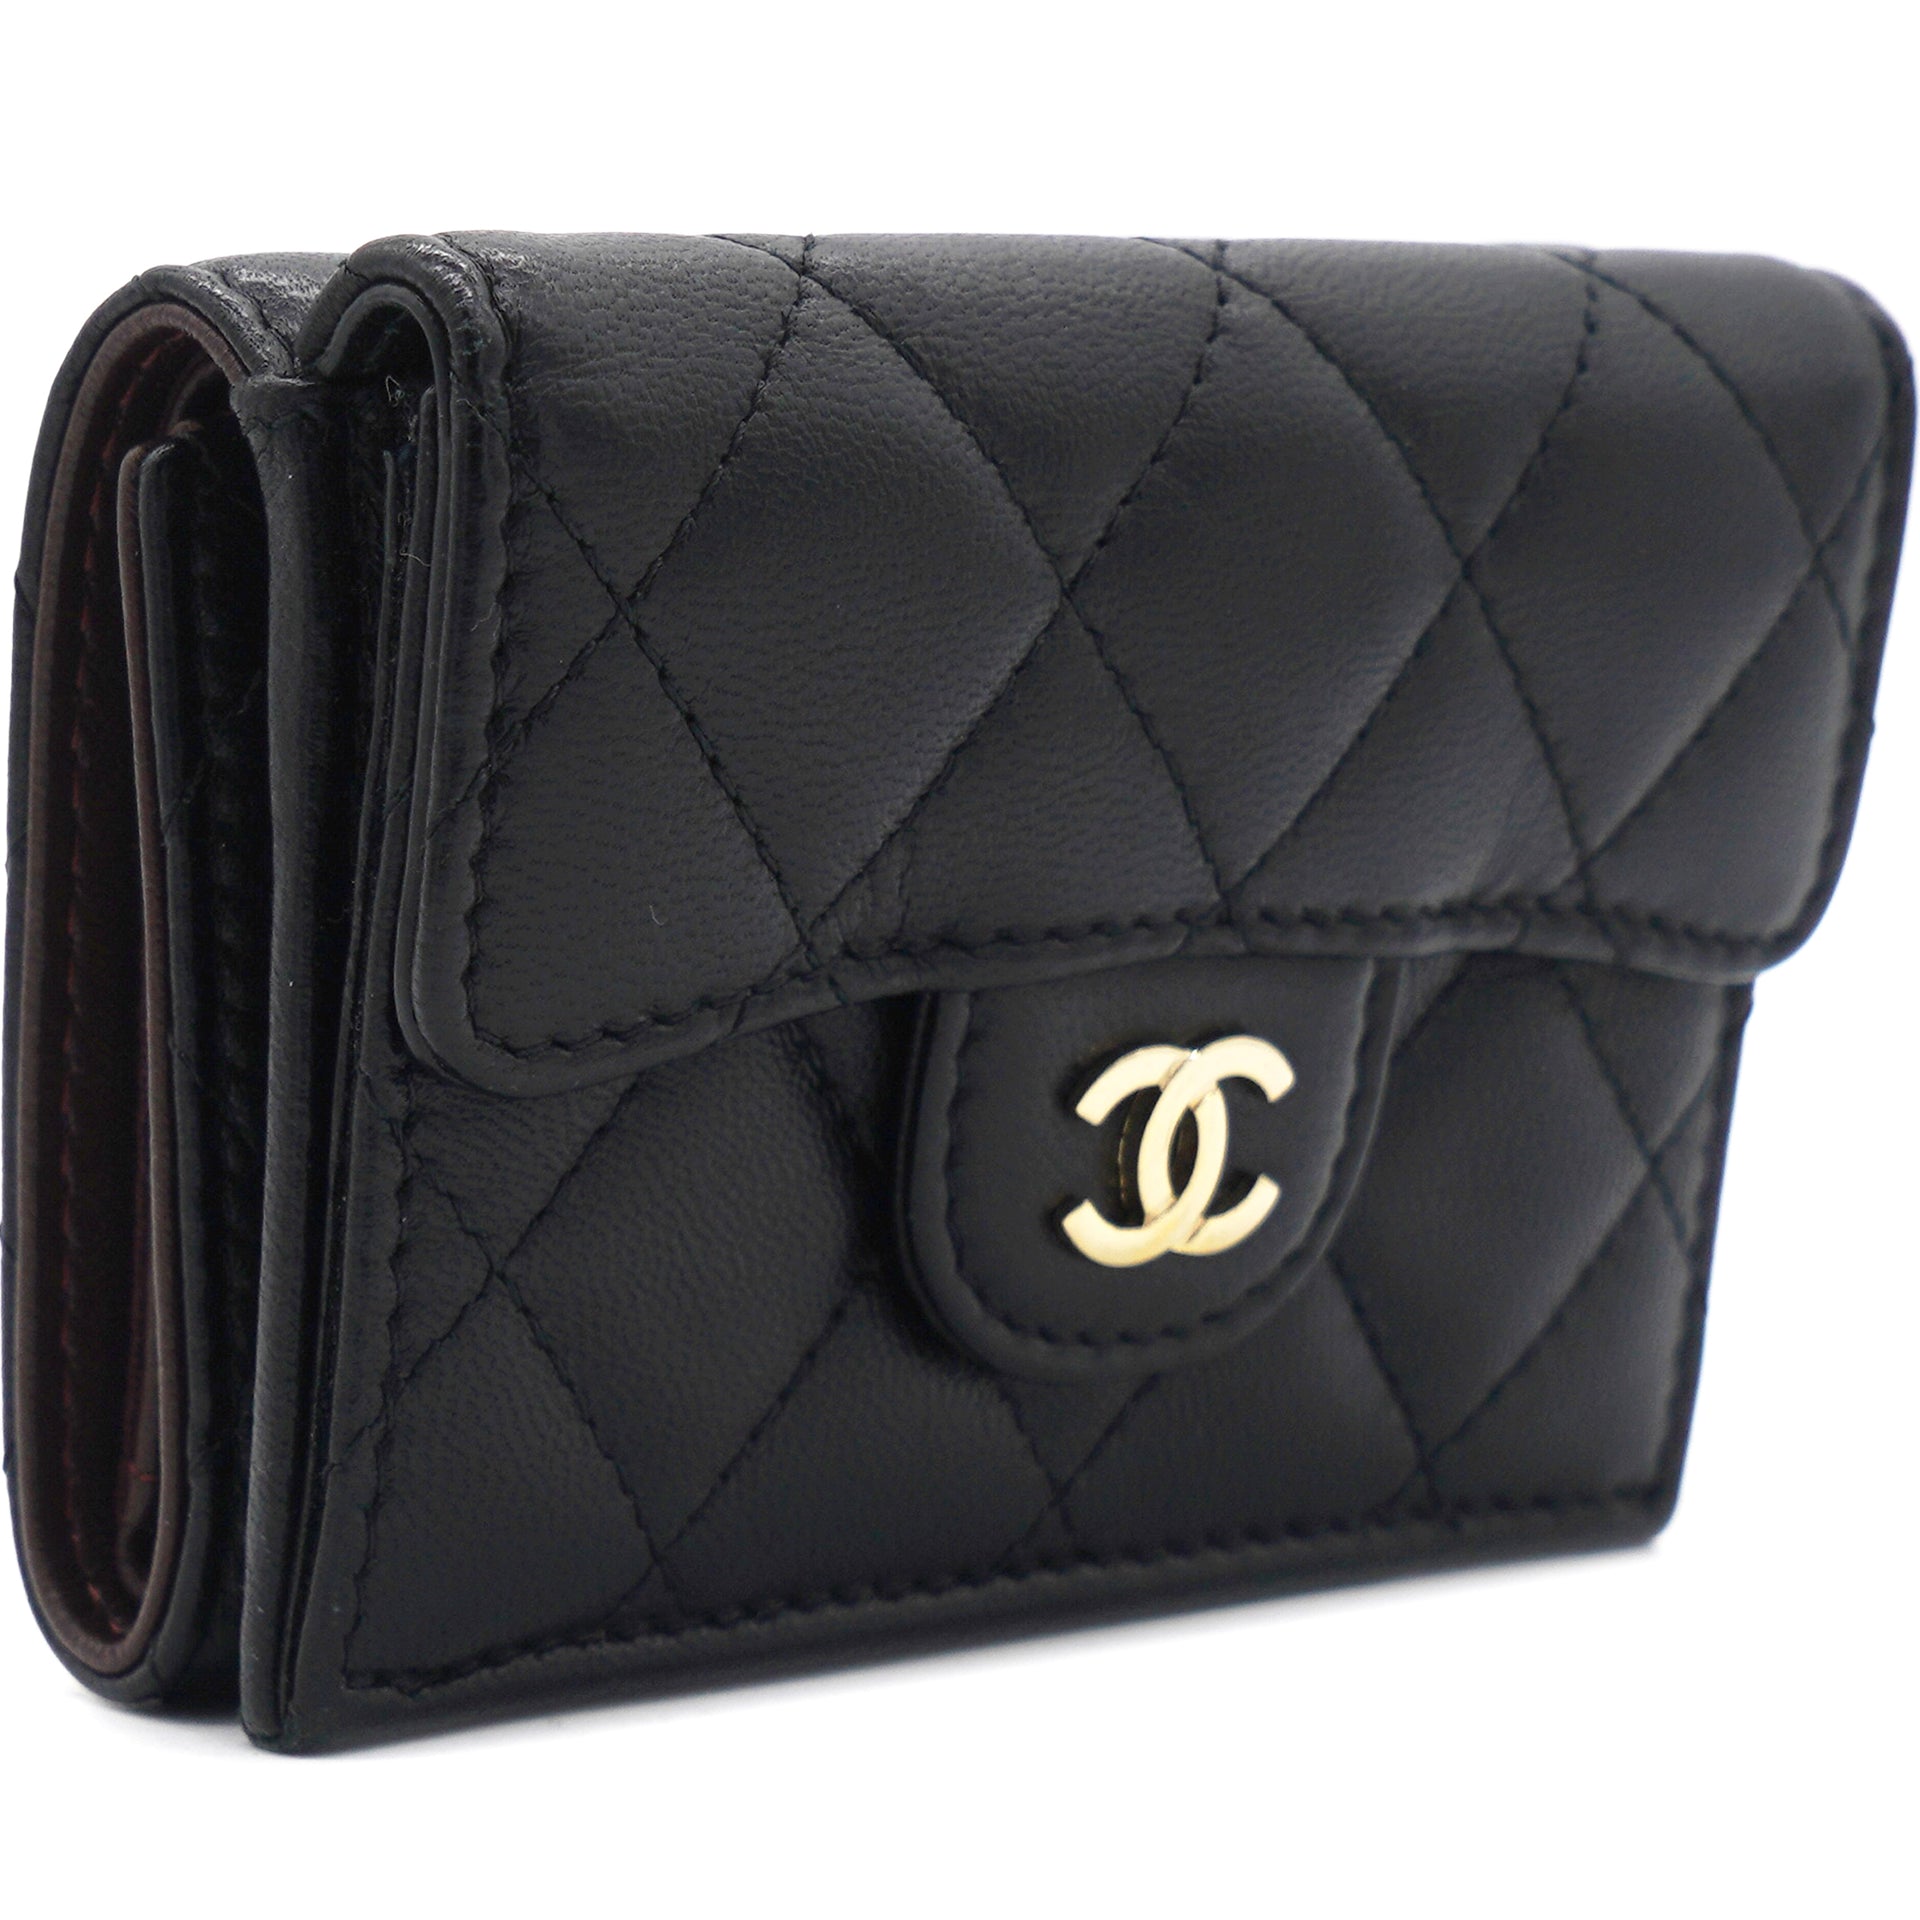 Chanel Coin Purse Wallets for Women